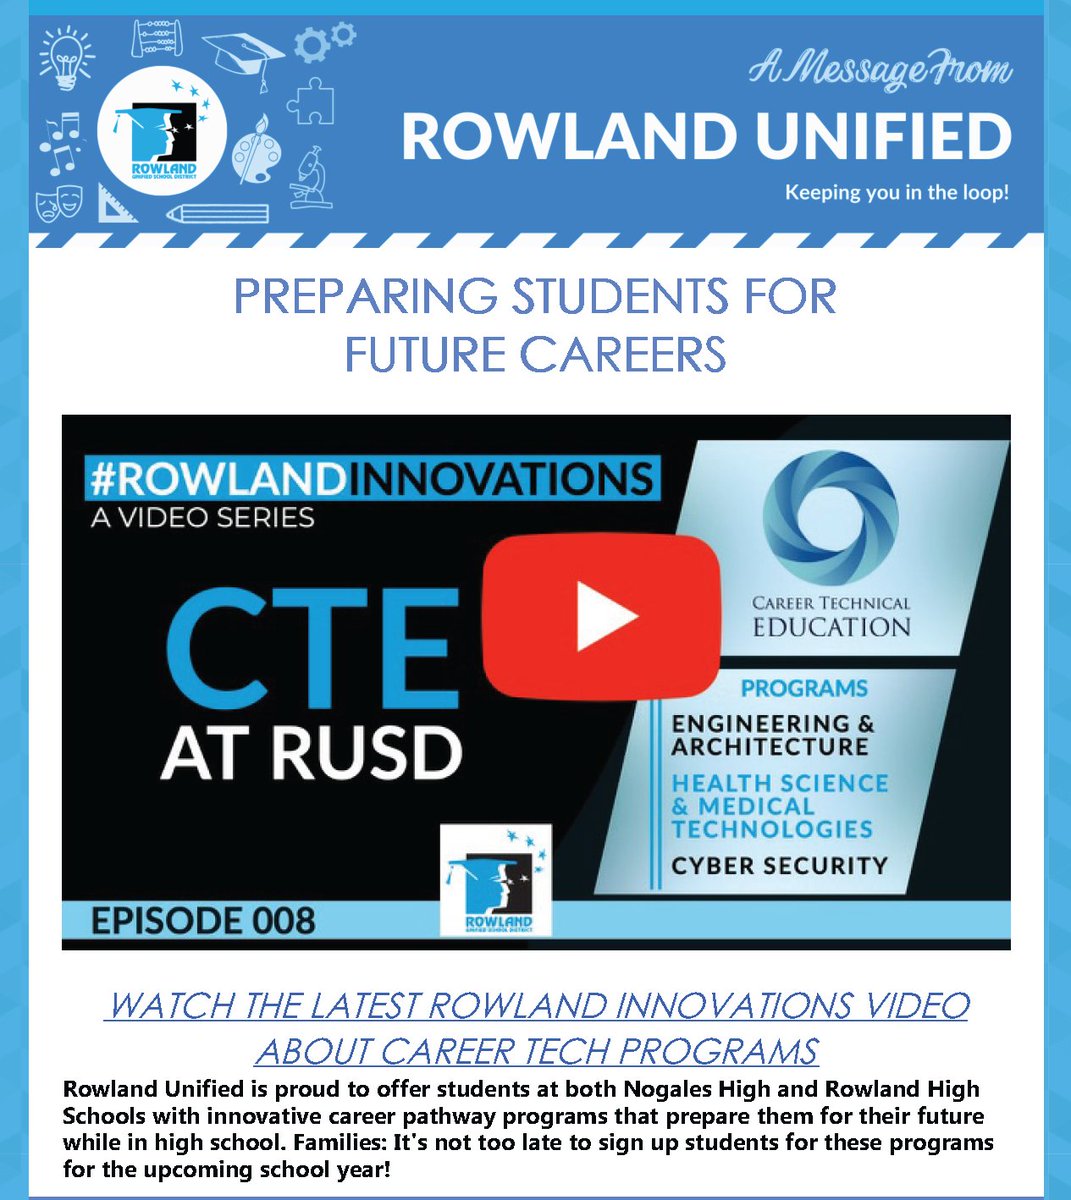 Hot off the press! Don't miss the latest RUSD News featuring our new video on RUSD's Career Technical Programs at @NogalesNobles and @rowlandhs! @RUSDCTE #WeAreRUSD Video: youtube.com/watch?v=3R-PBW… RUSD News: conta.cc/3HQVDmu